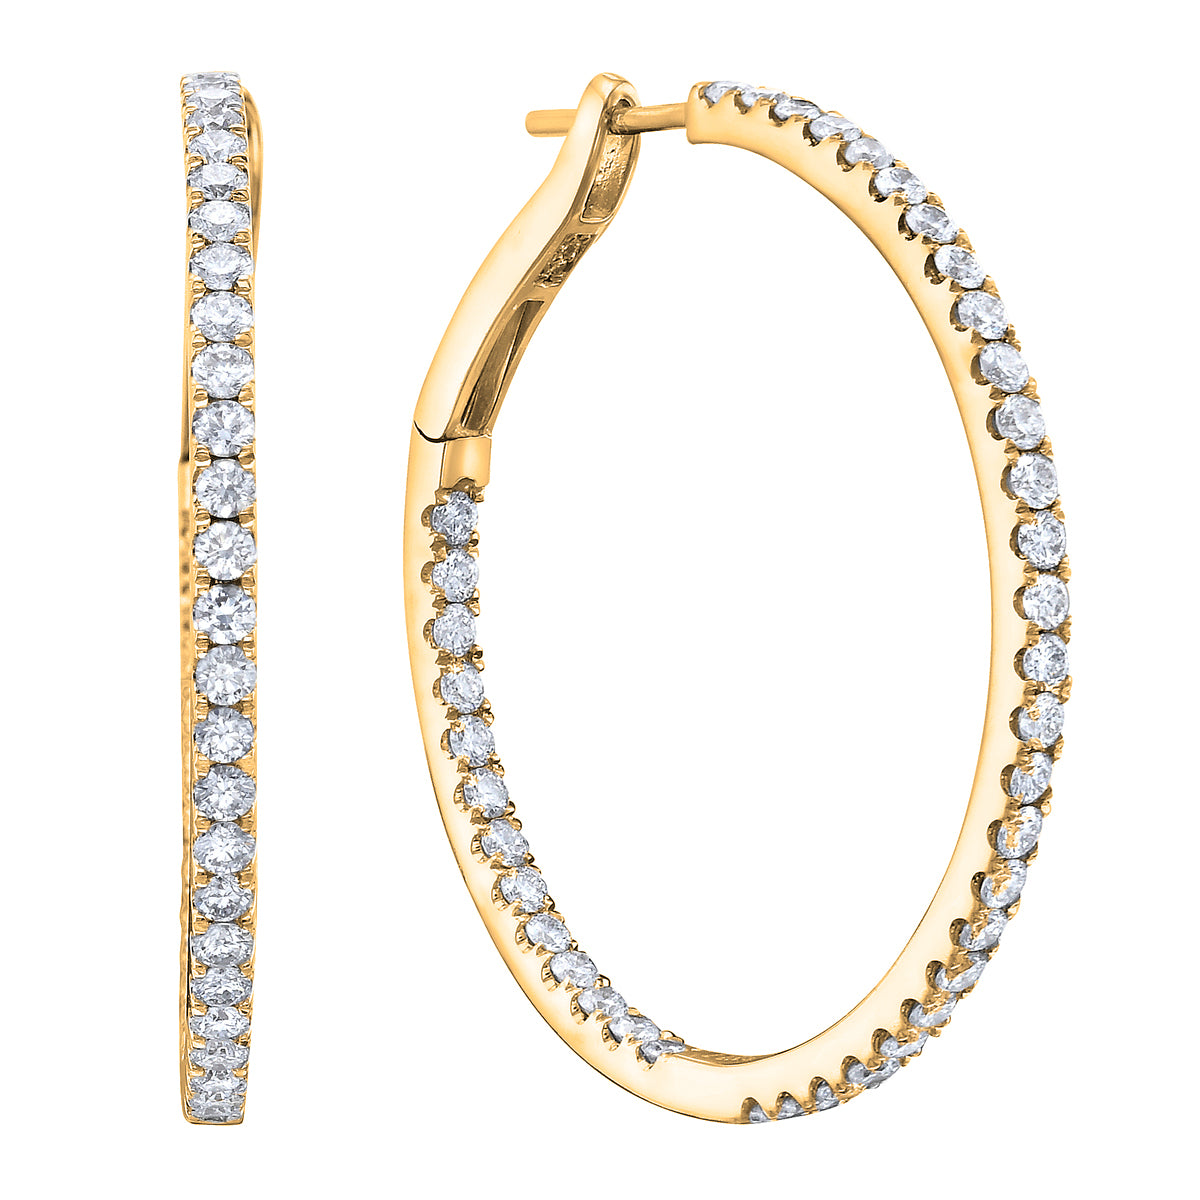 1.25 in Yellow Gold Insdie and Out Diamond Hoop Earrings